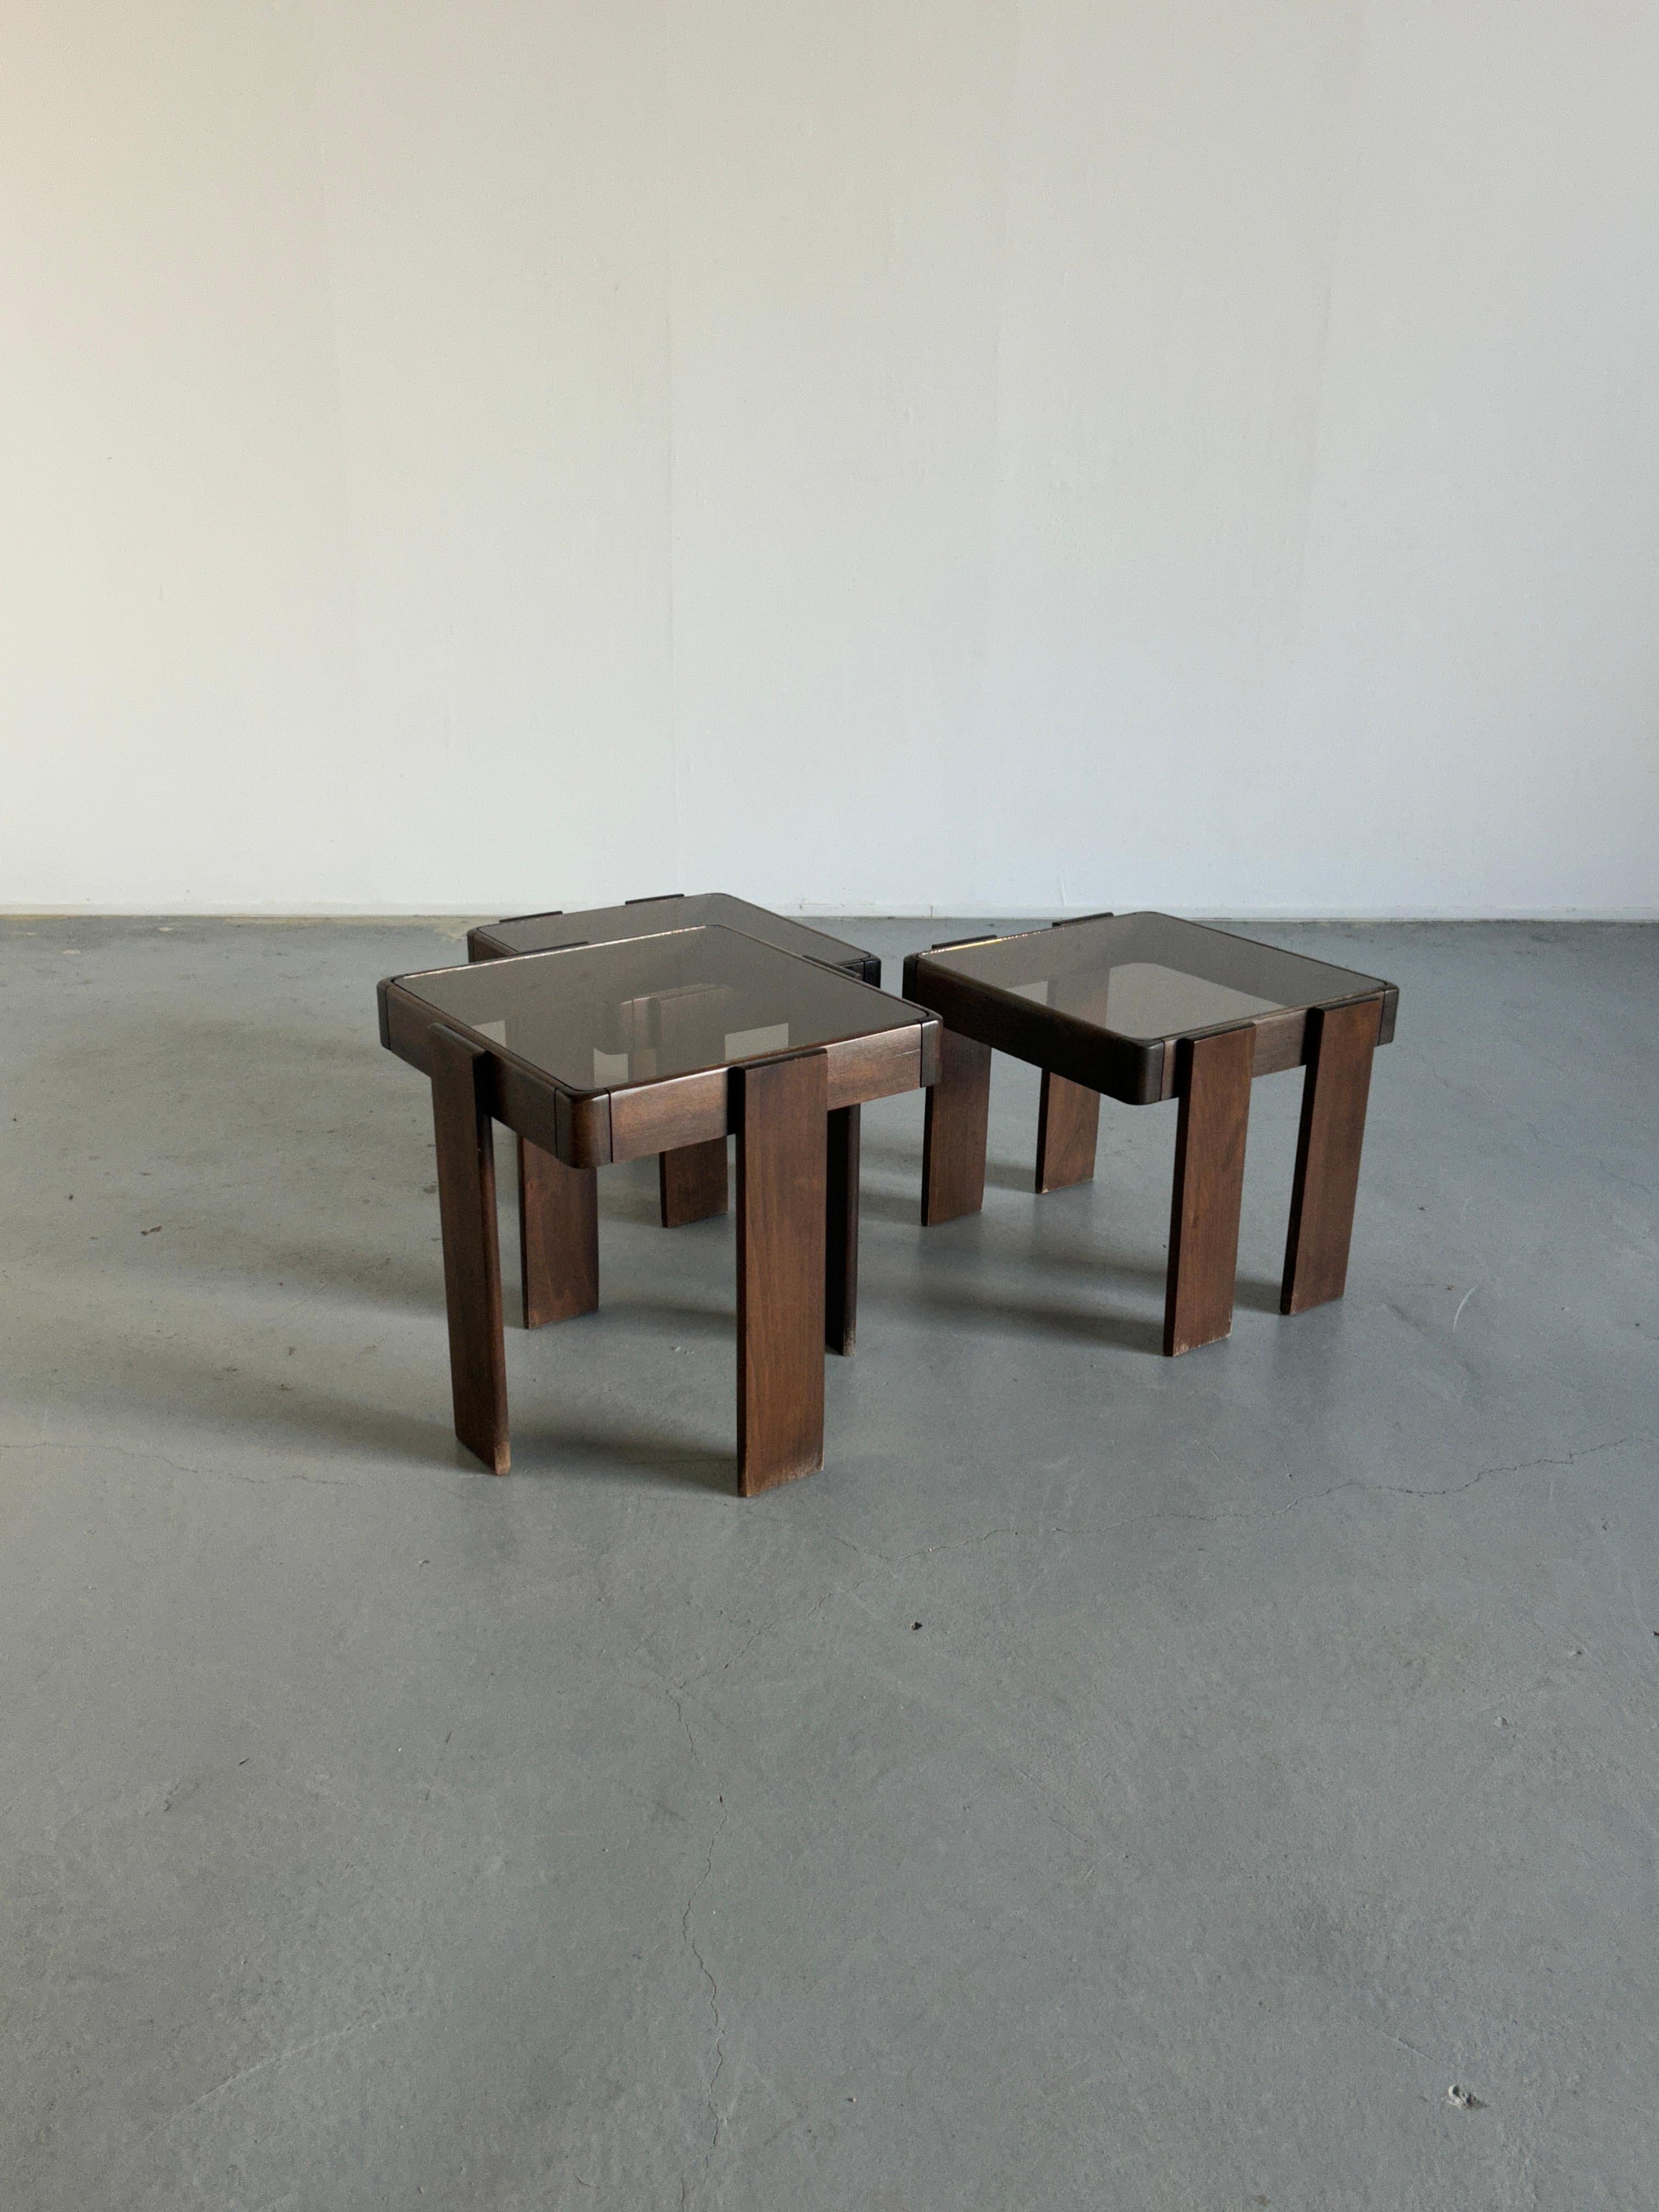 Croatian Vintage Set of Three Nesting Tables, Designed by Gianfranco Frattini for Cassina